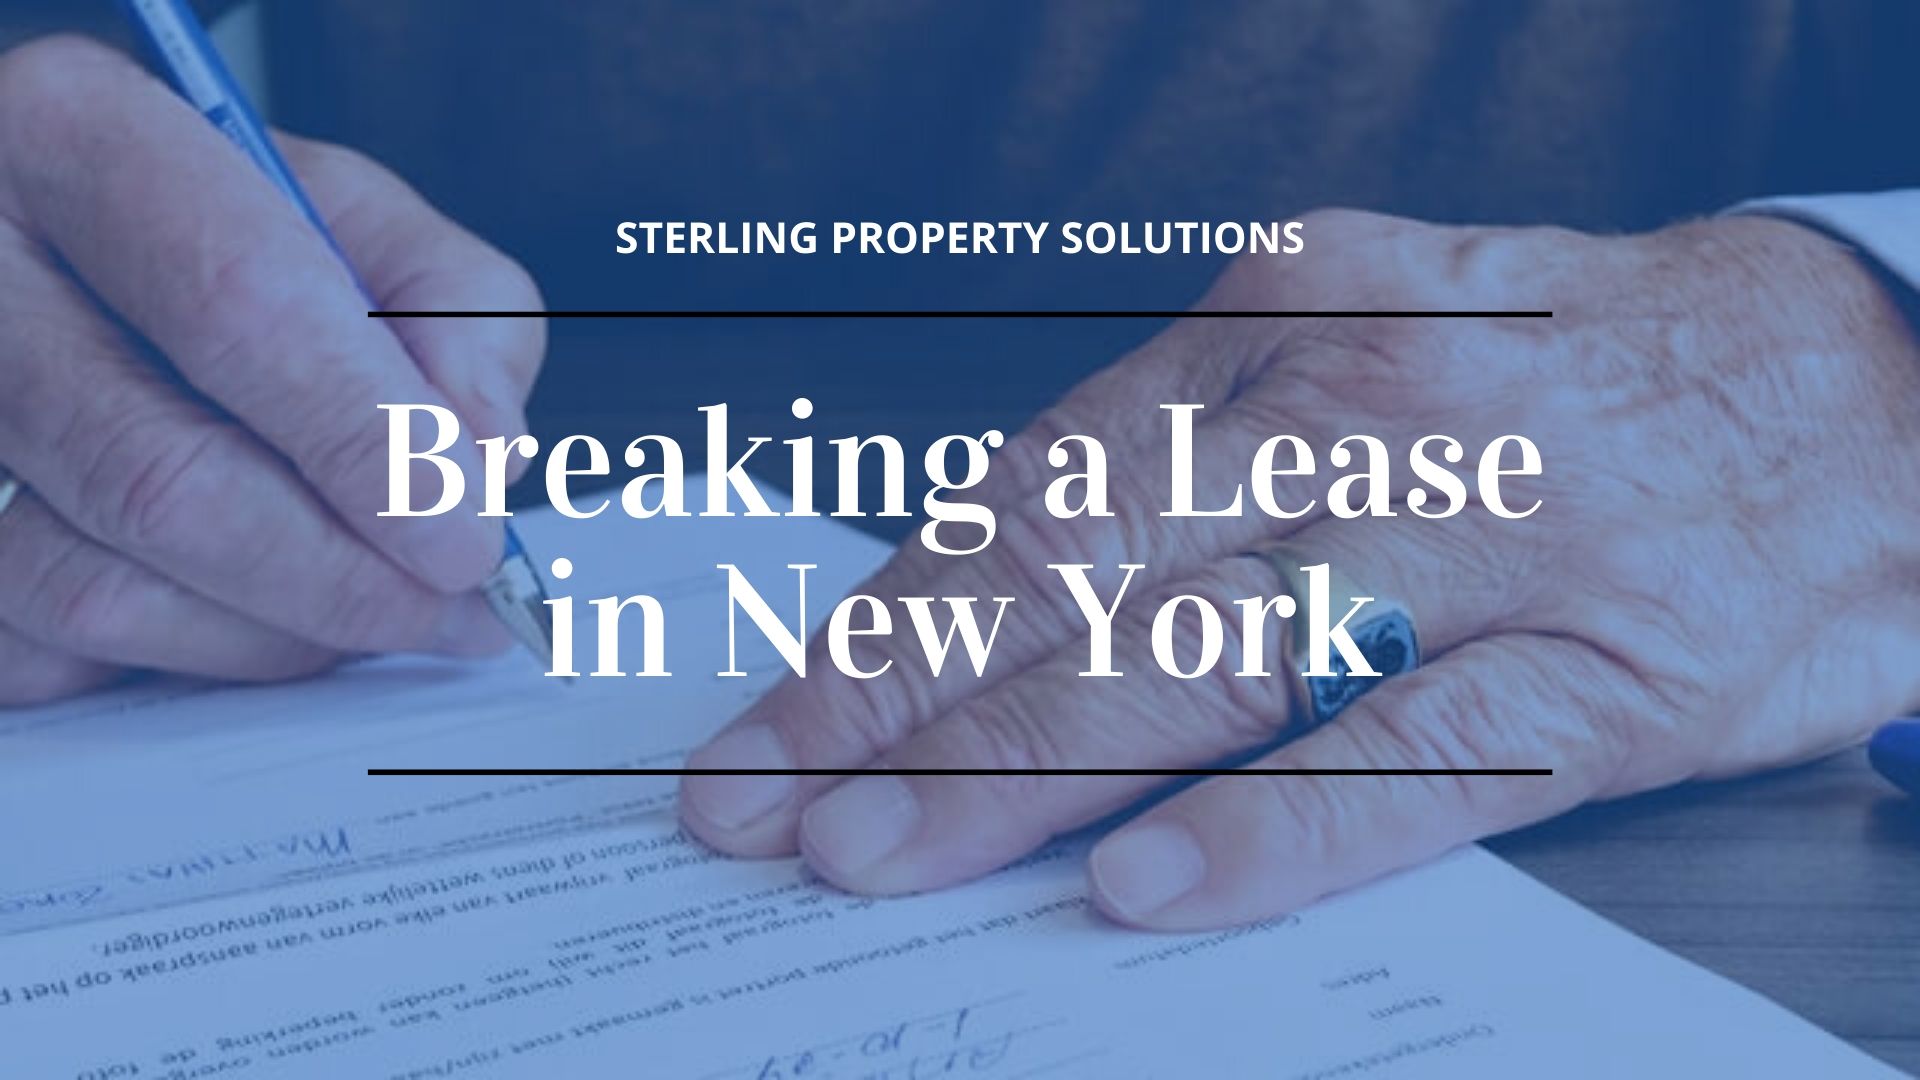 terminating-lease-agreement-in-ny-sterling-property-solutions